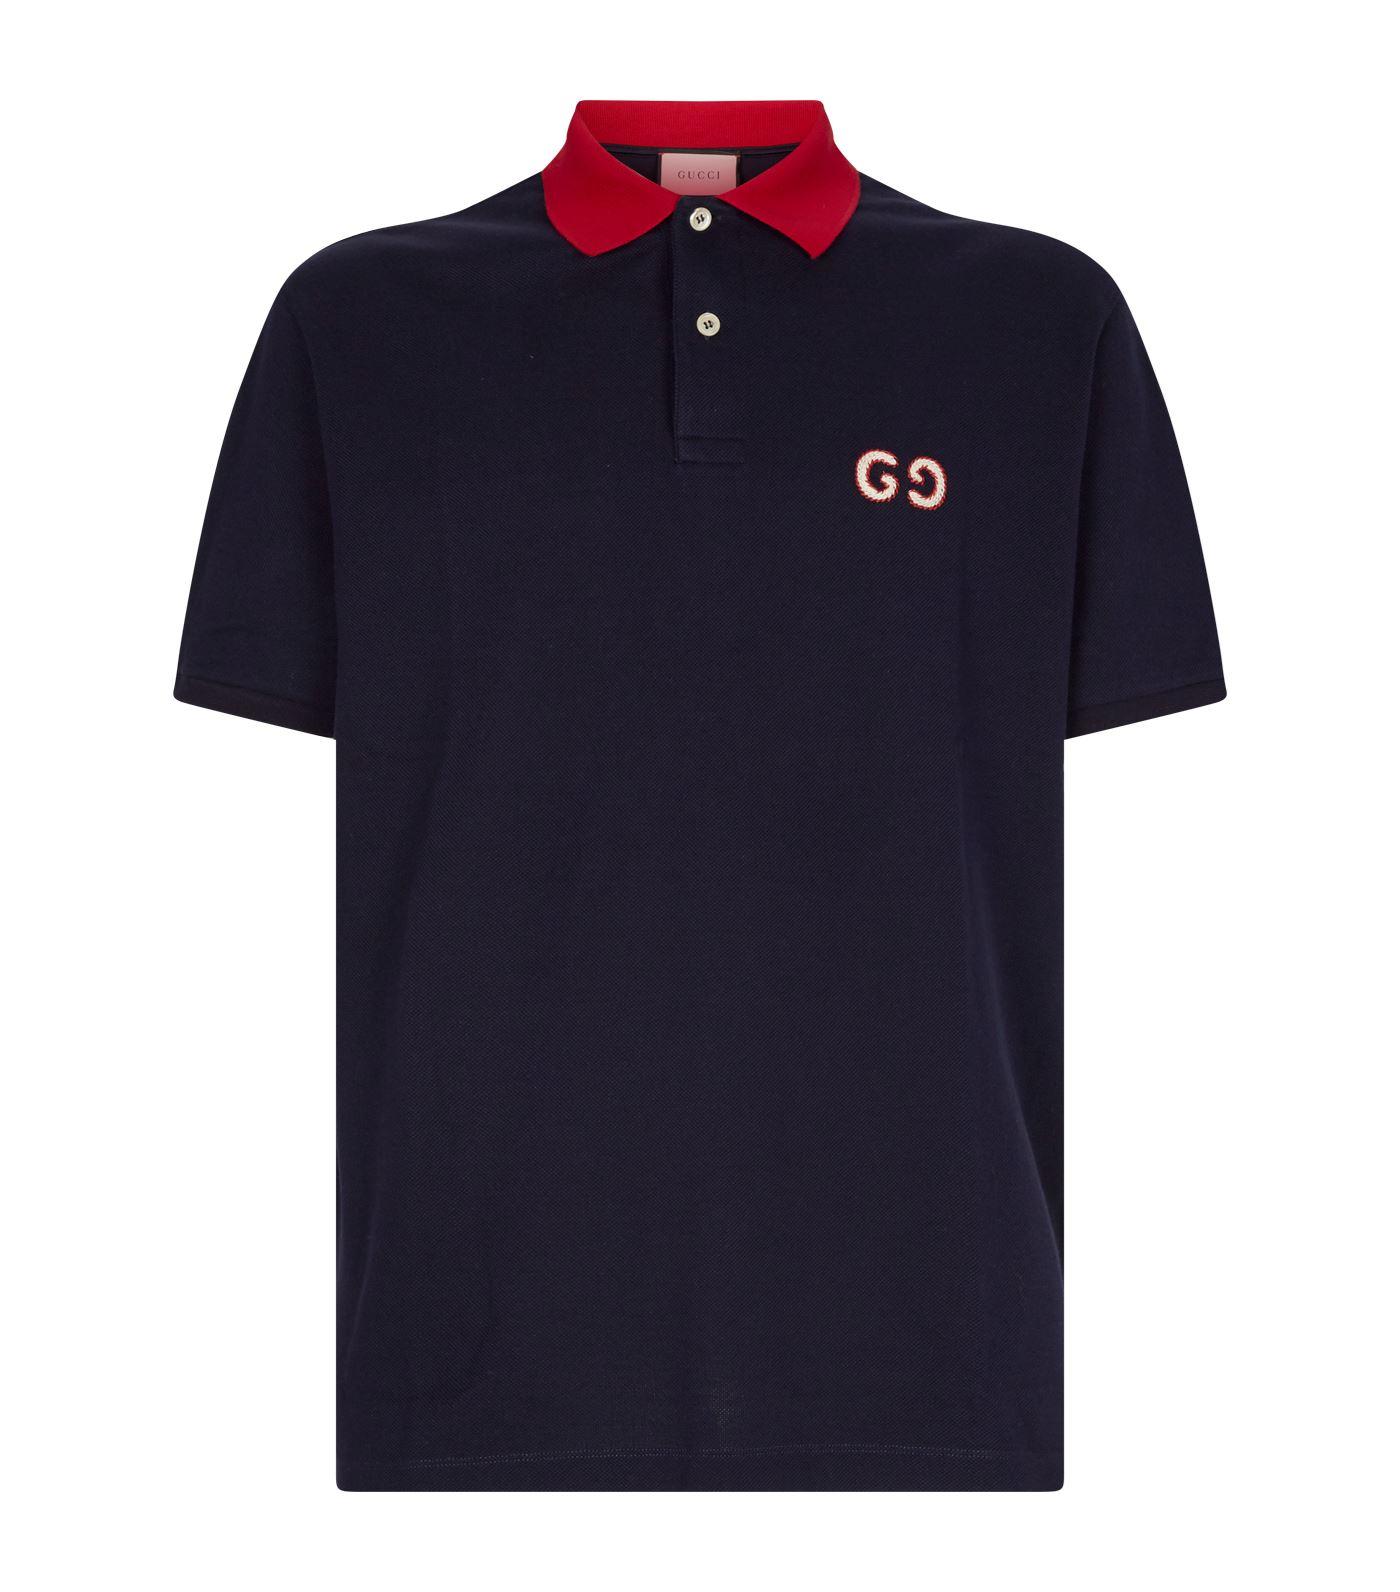 Gucci Contrast Collar Polo Shirt in Navy (Blue) for Men - Lyst